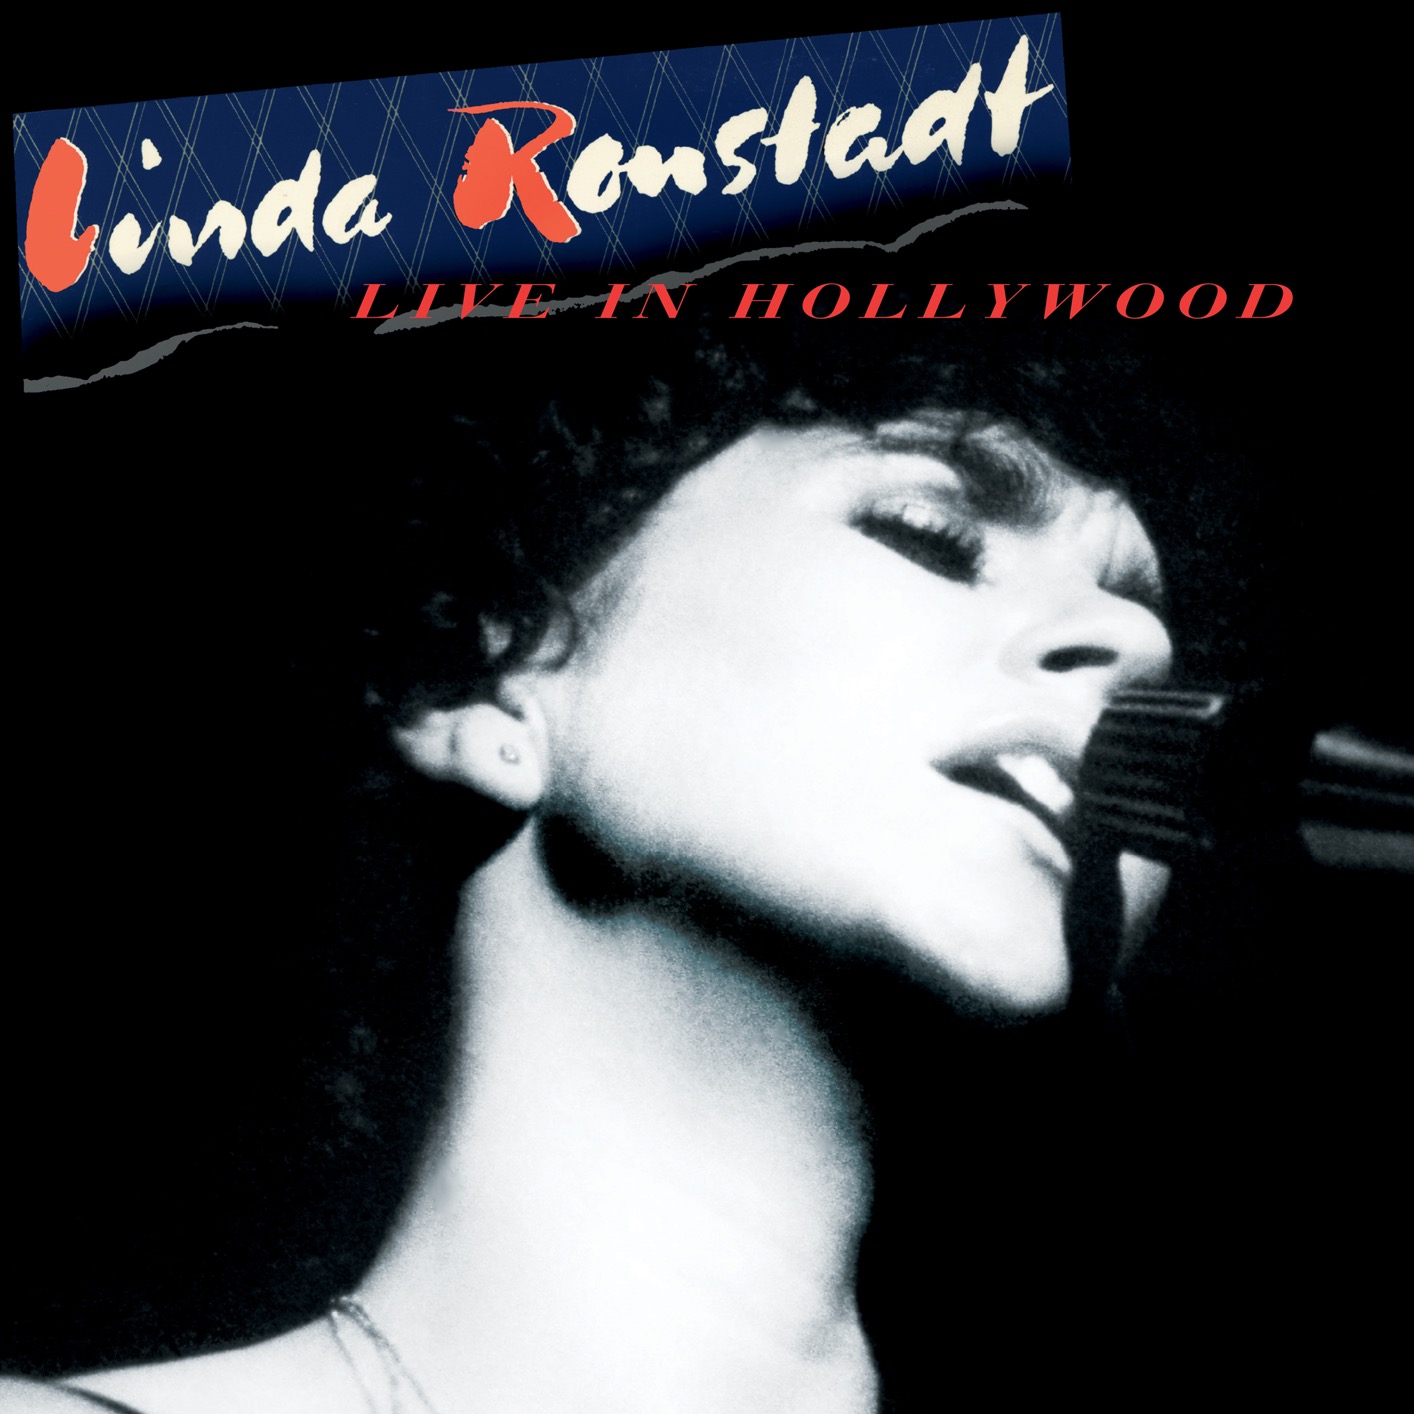 Linda Ronstadt - Live In Hollywood (2019) [FLAC 24bit/96kHz]